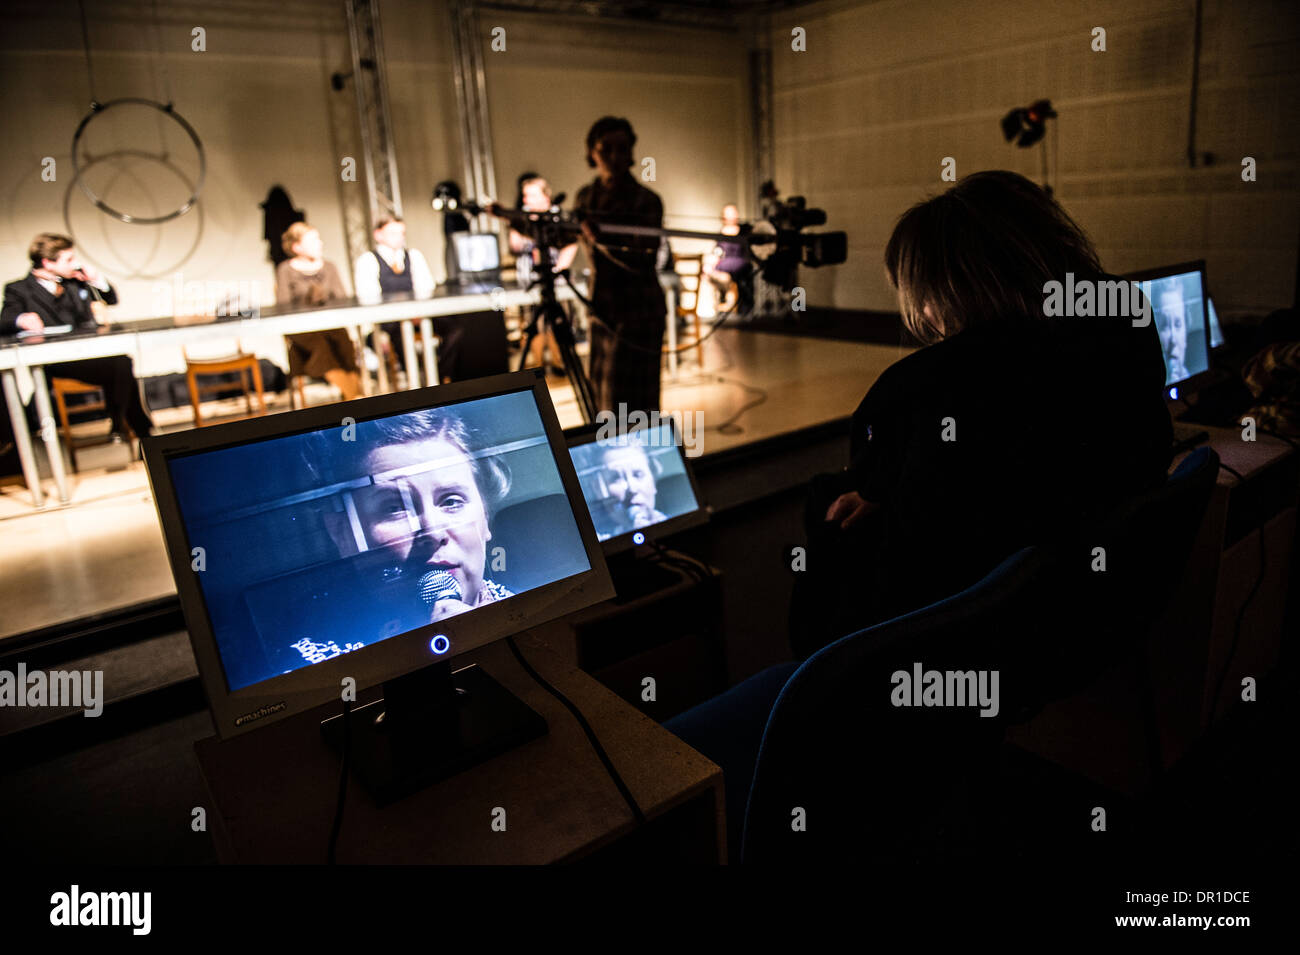 Welsh language theatre studies students performing actors acting in 5:7, a multimedia drama at Aberystwyth university, Wales UK Stock Photo